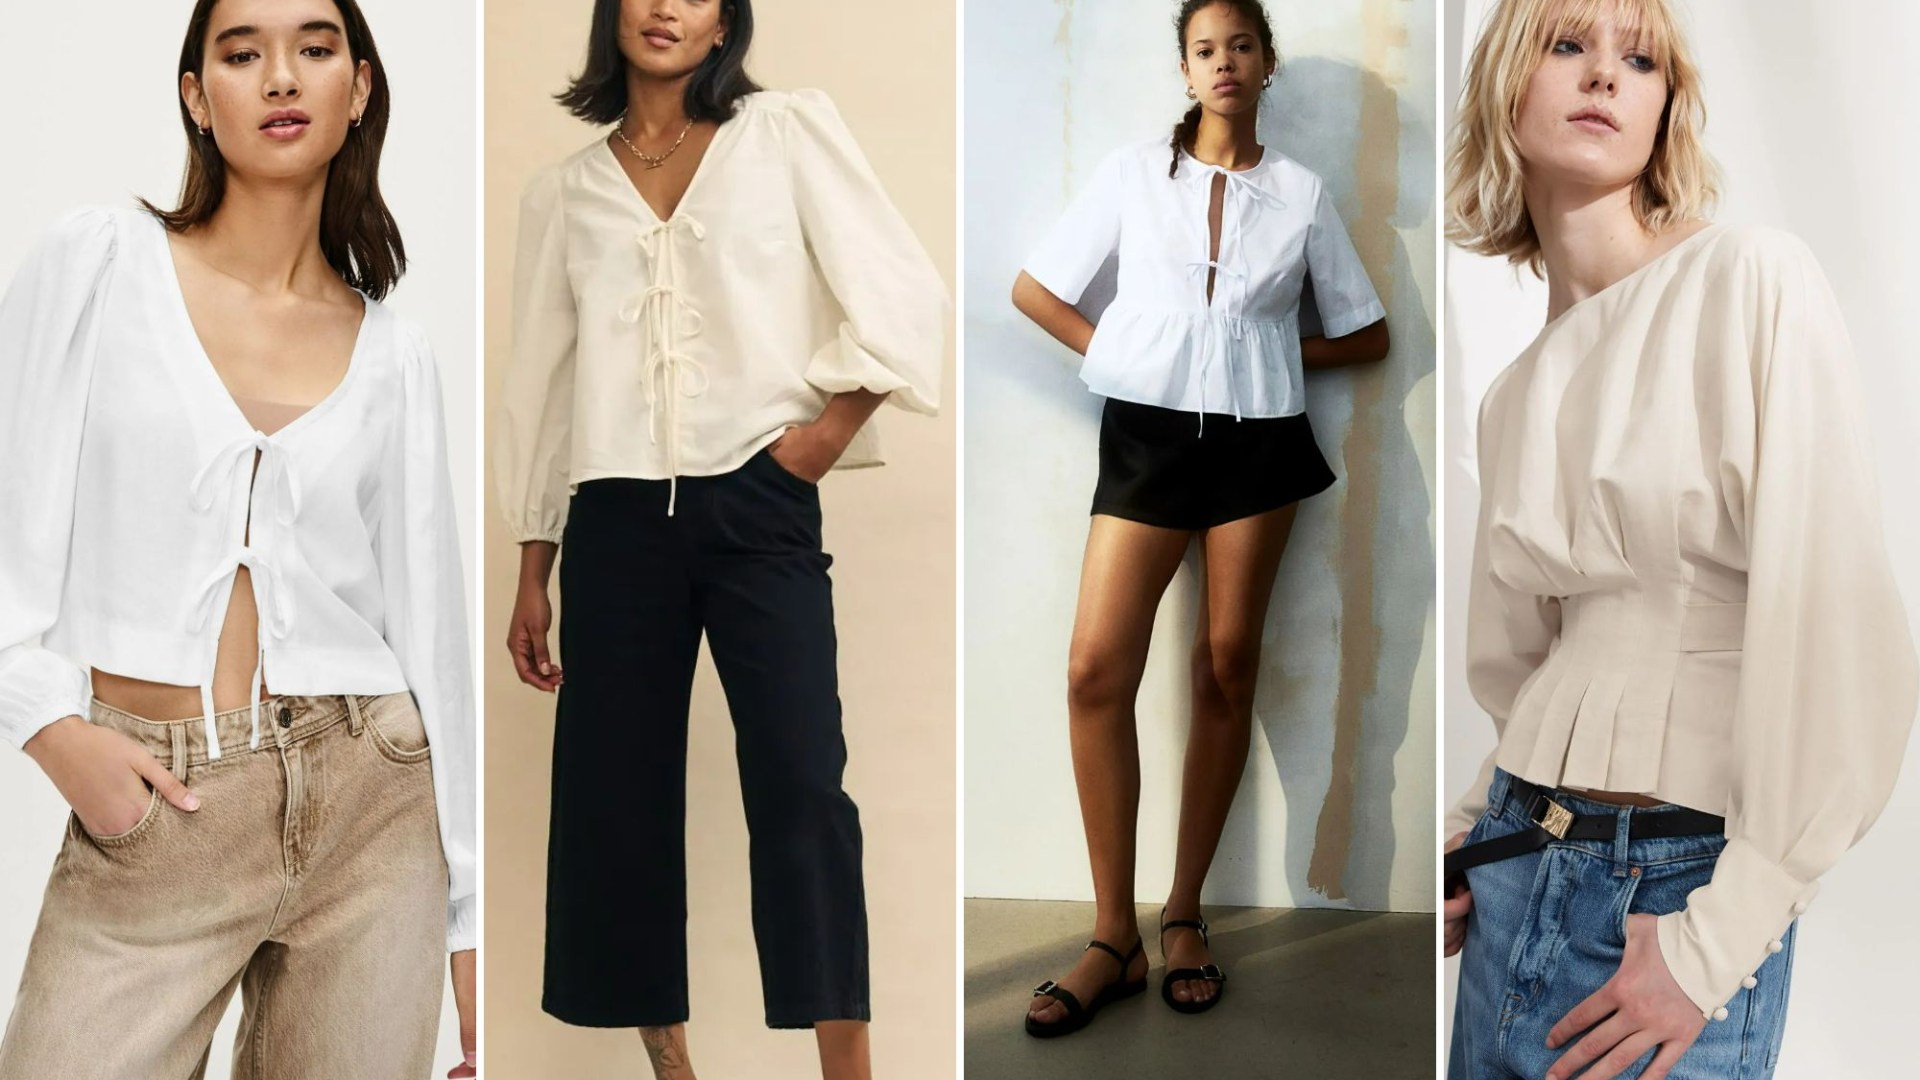 The ‘Copenhagen blouse’ is this season’s must-have…the best high street dupes of the Ganni version but for 127 less [Video]